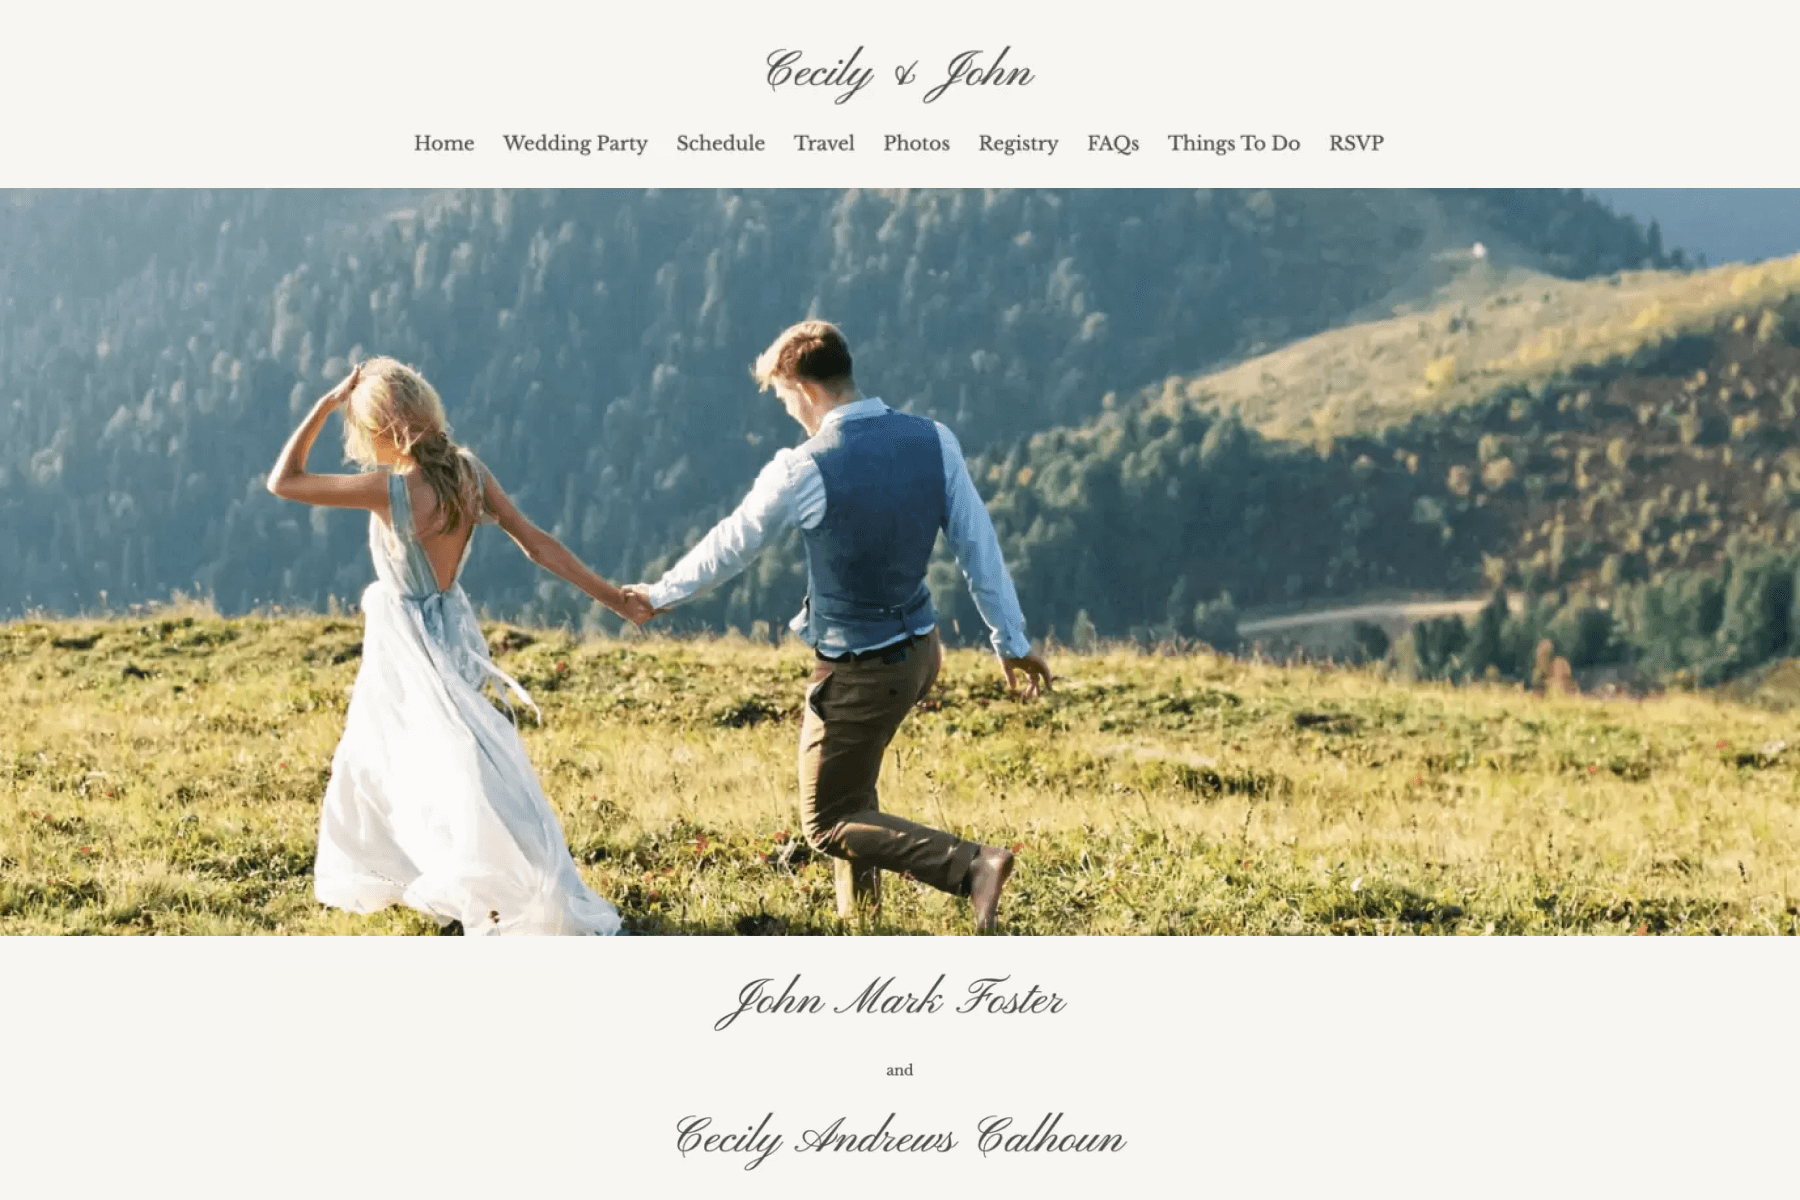 A screenshot of a wedding website shows a photo of a couple in wedding attire walking away from the camera on a green hill with the names “John Mark Foster” and “Cecily Andrews Calhoun.”